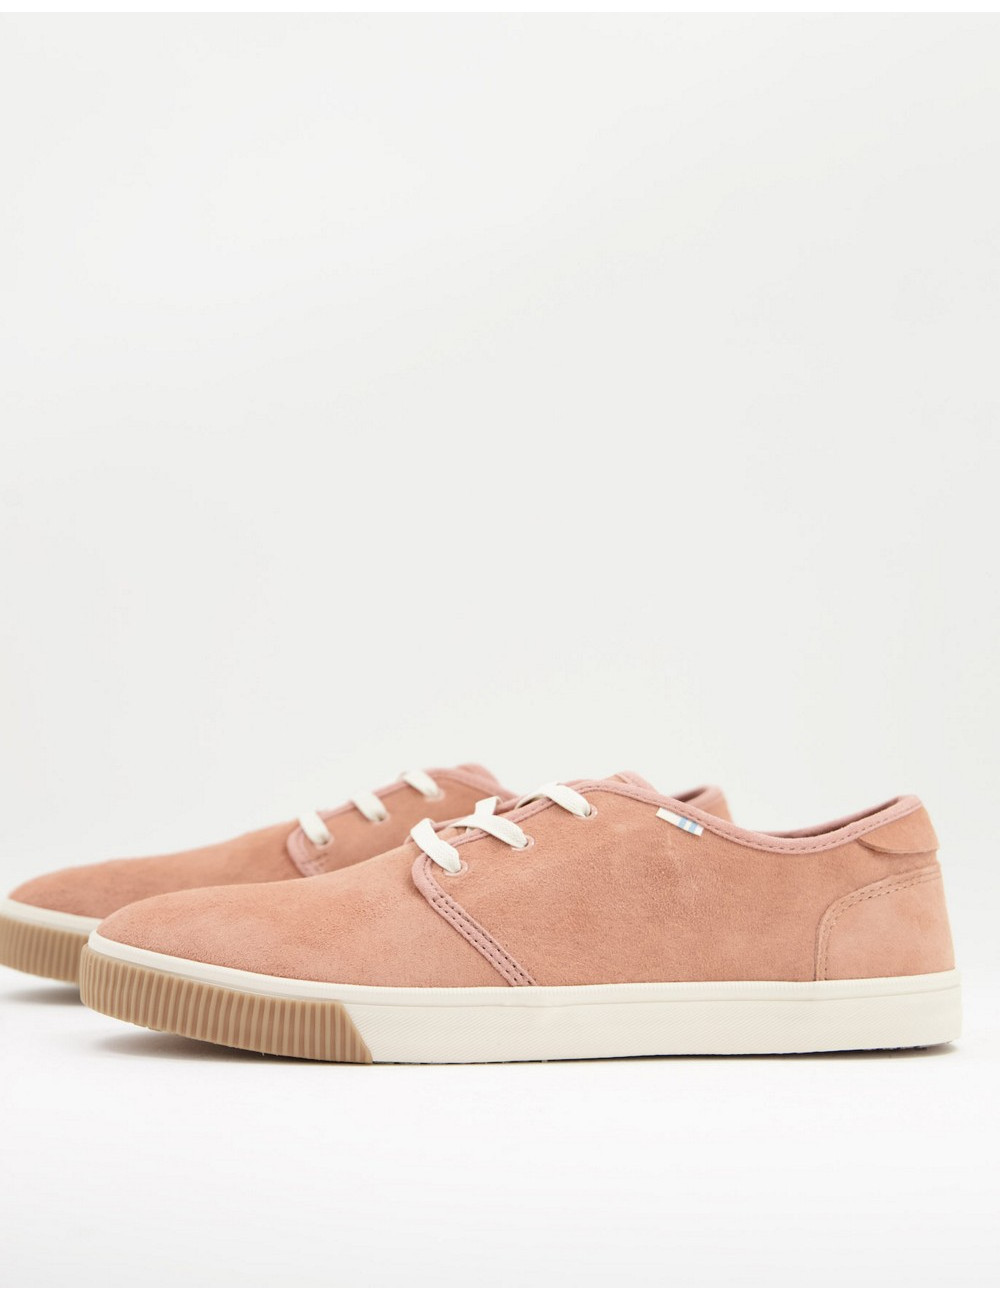 Toms plimsoll trainer in pink